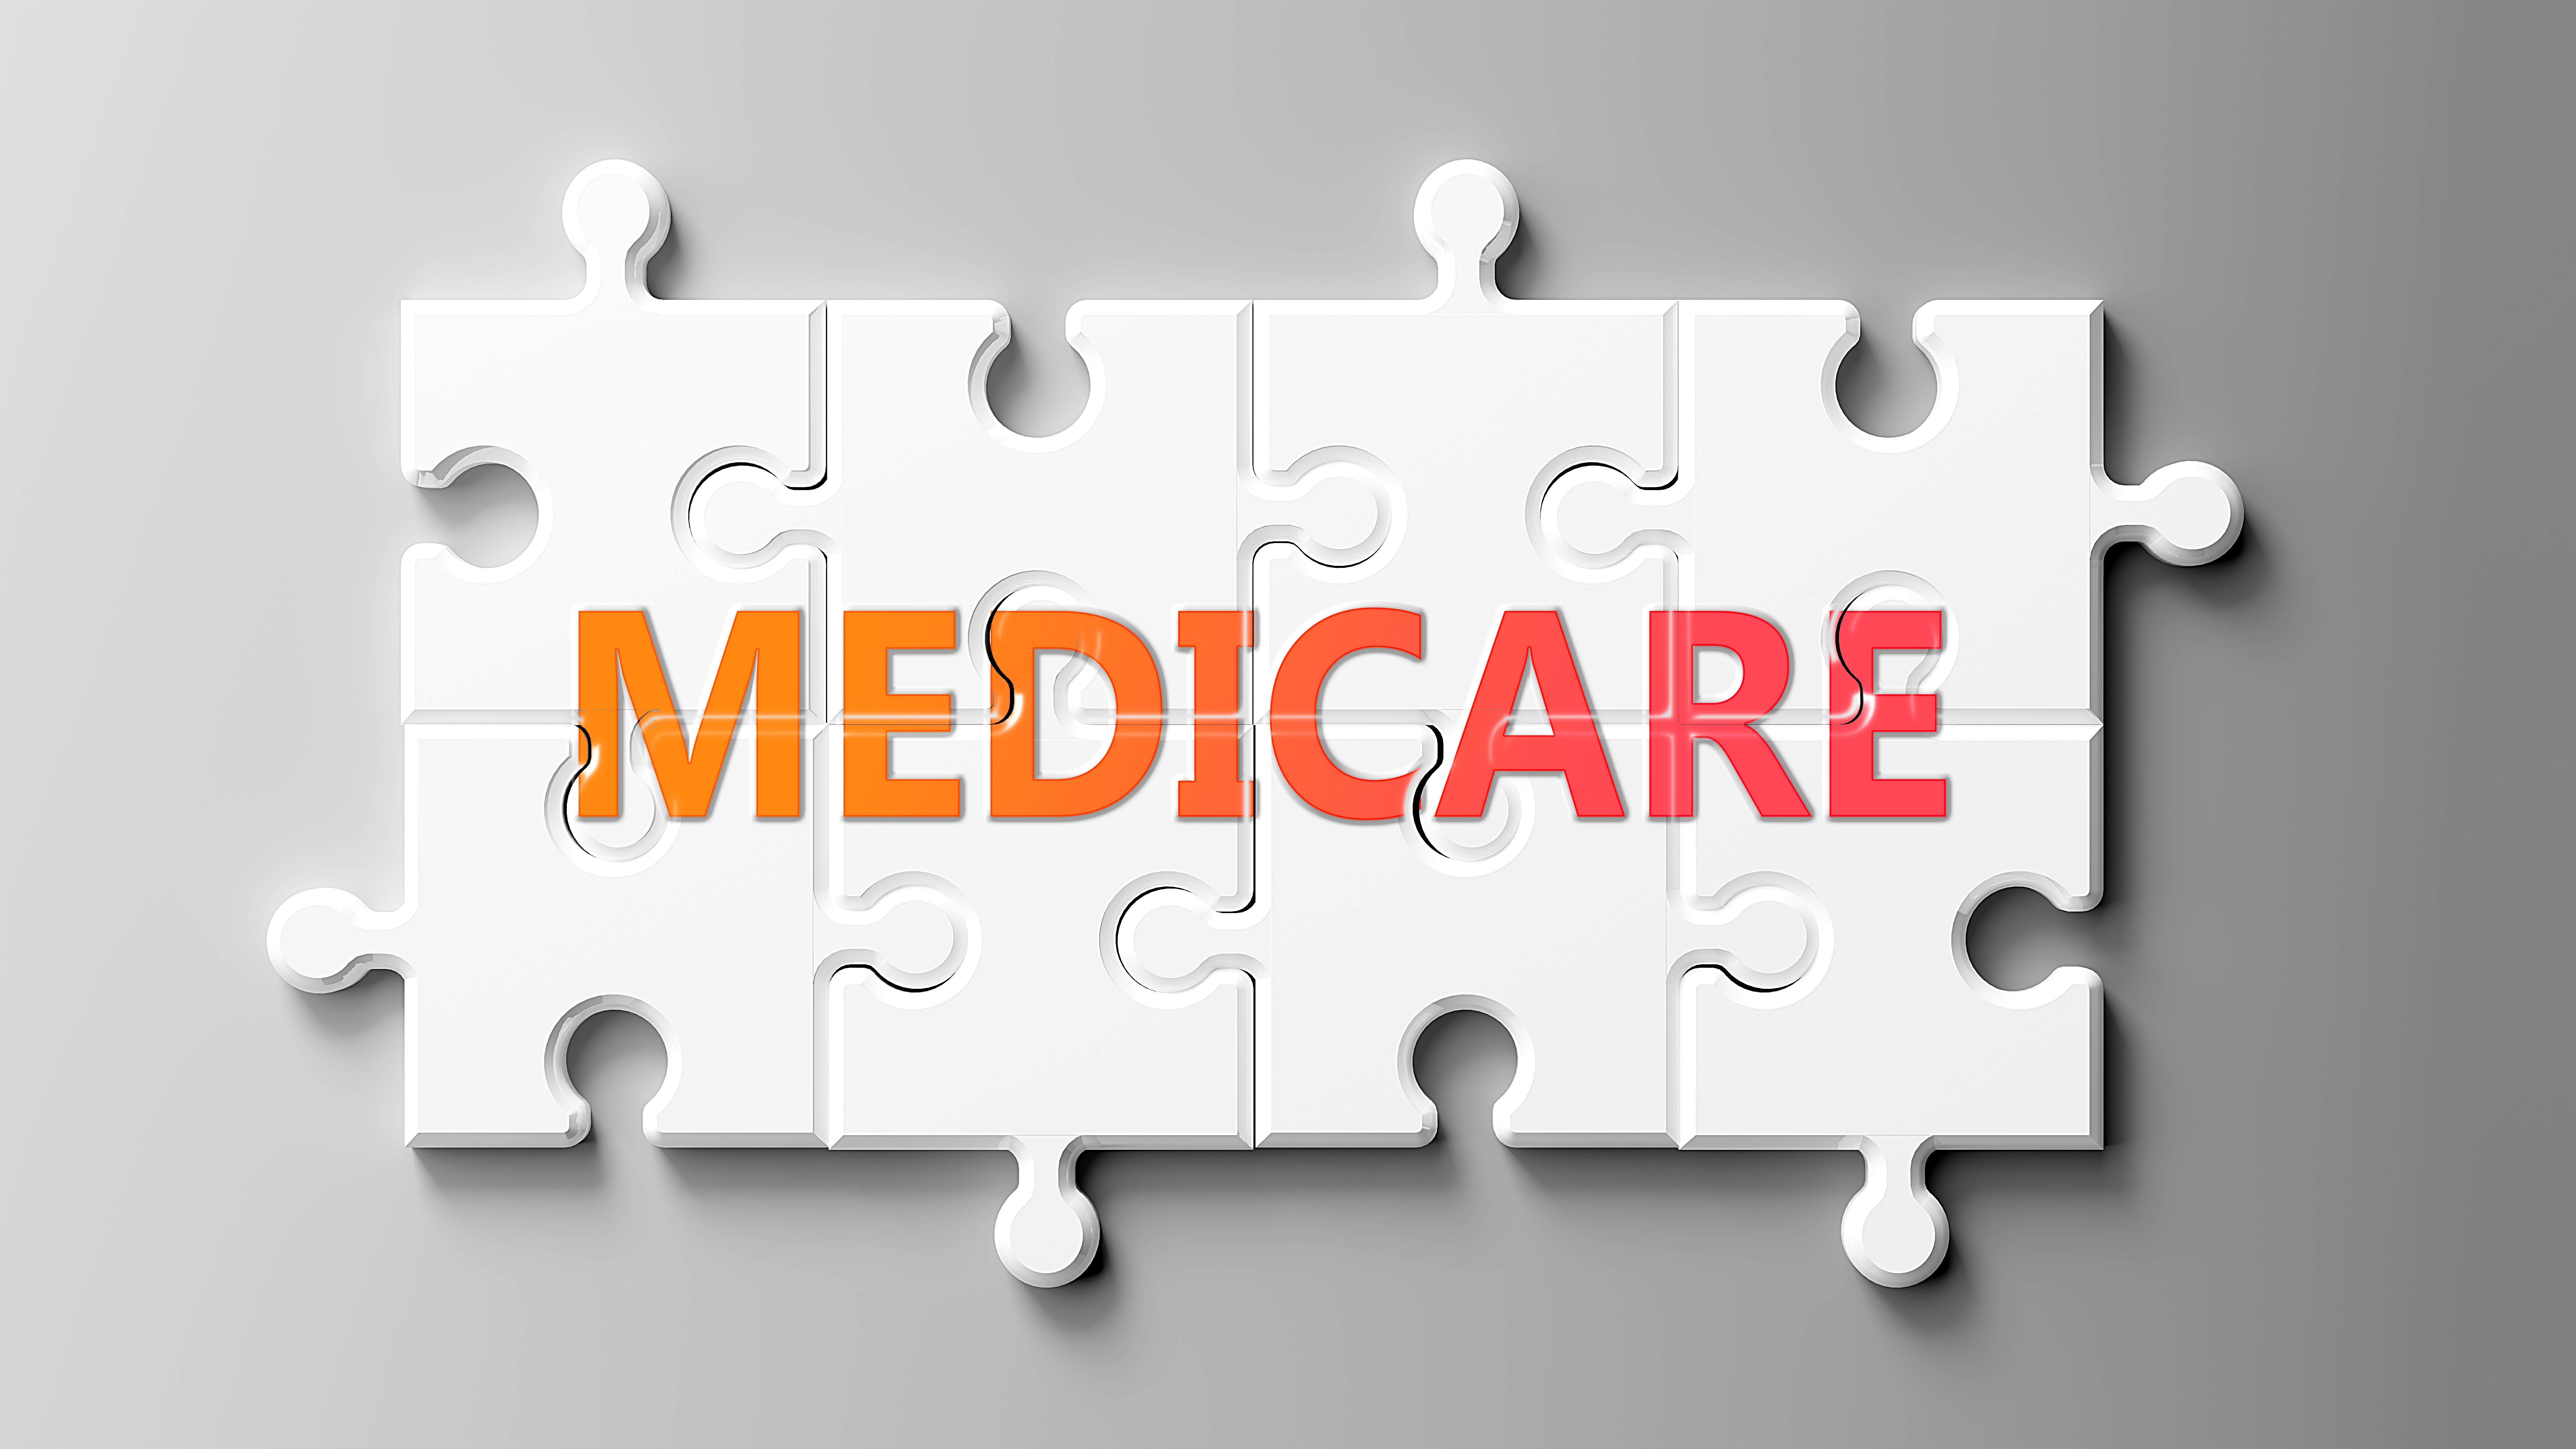 Medicare Coverage Puzzle, Cancer Treatment